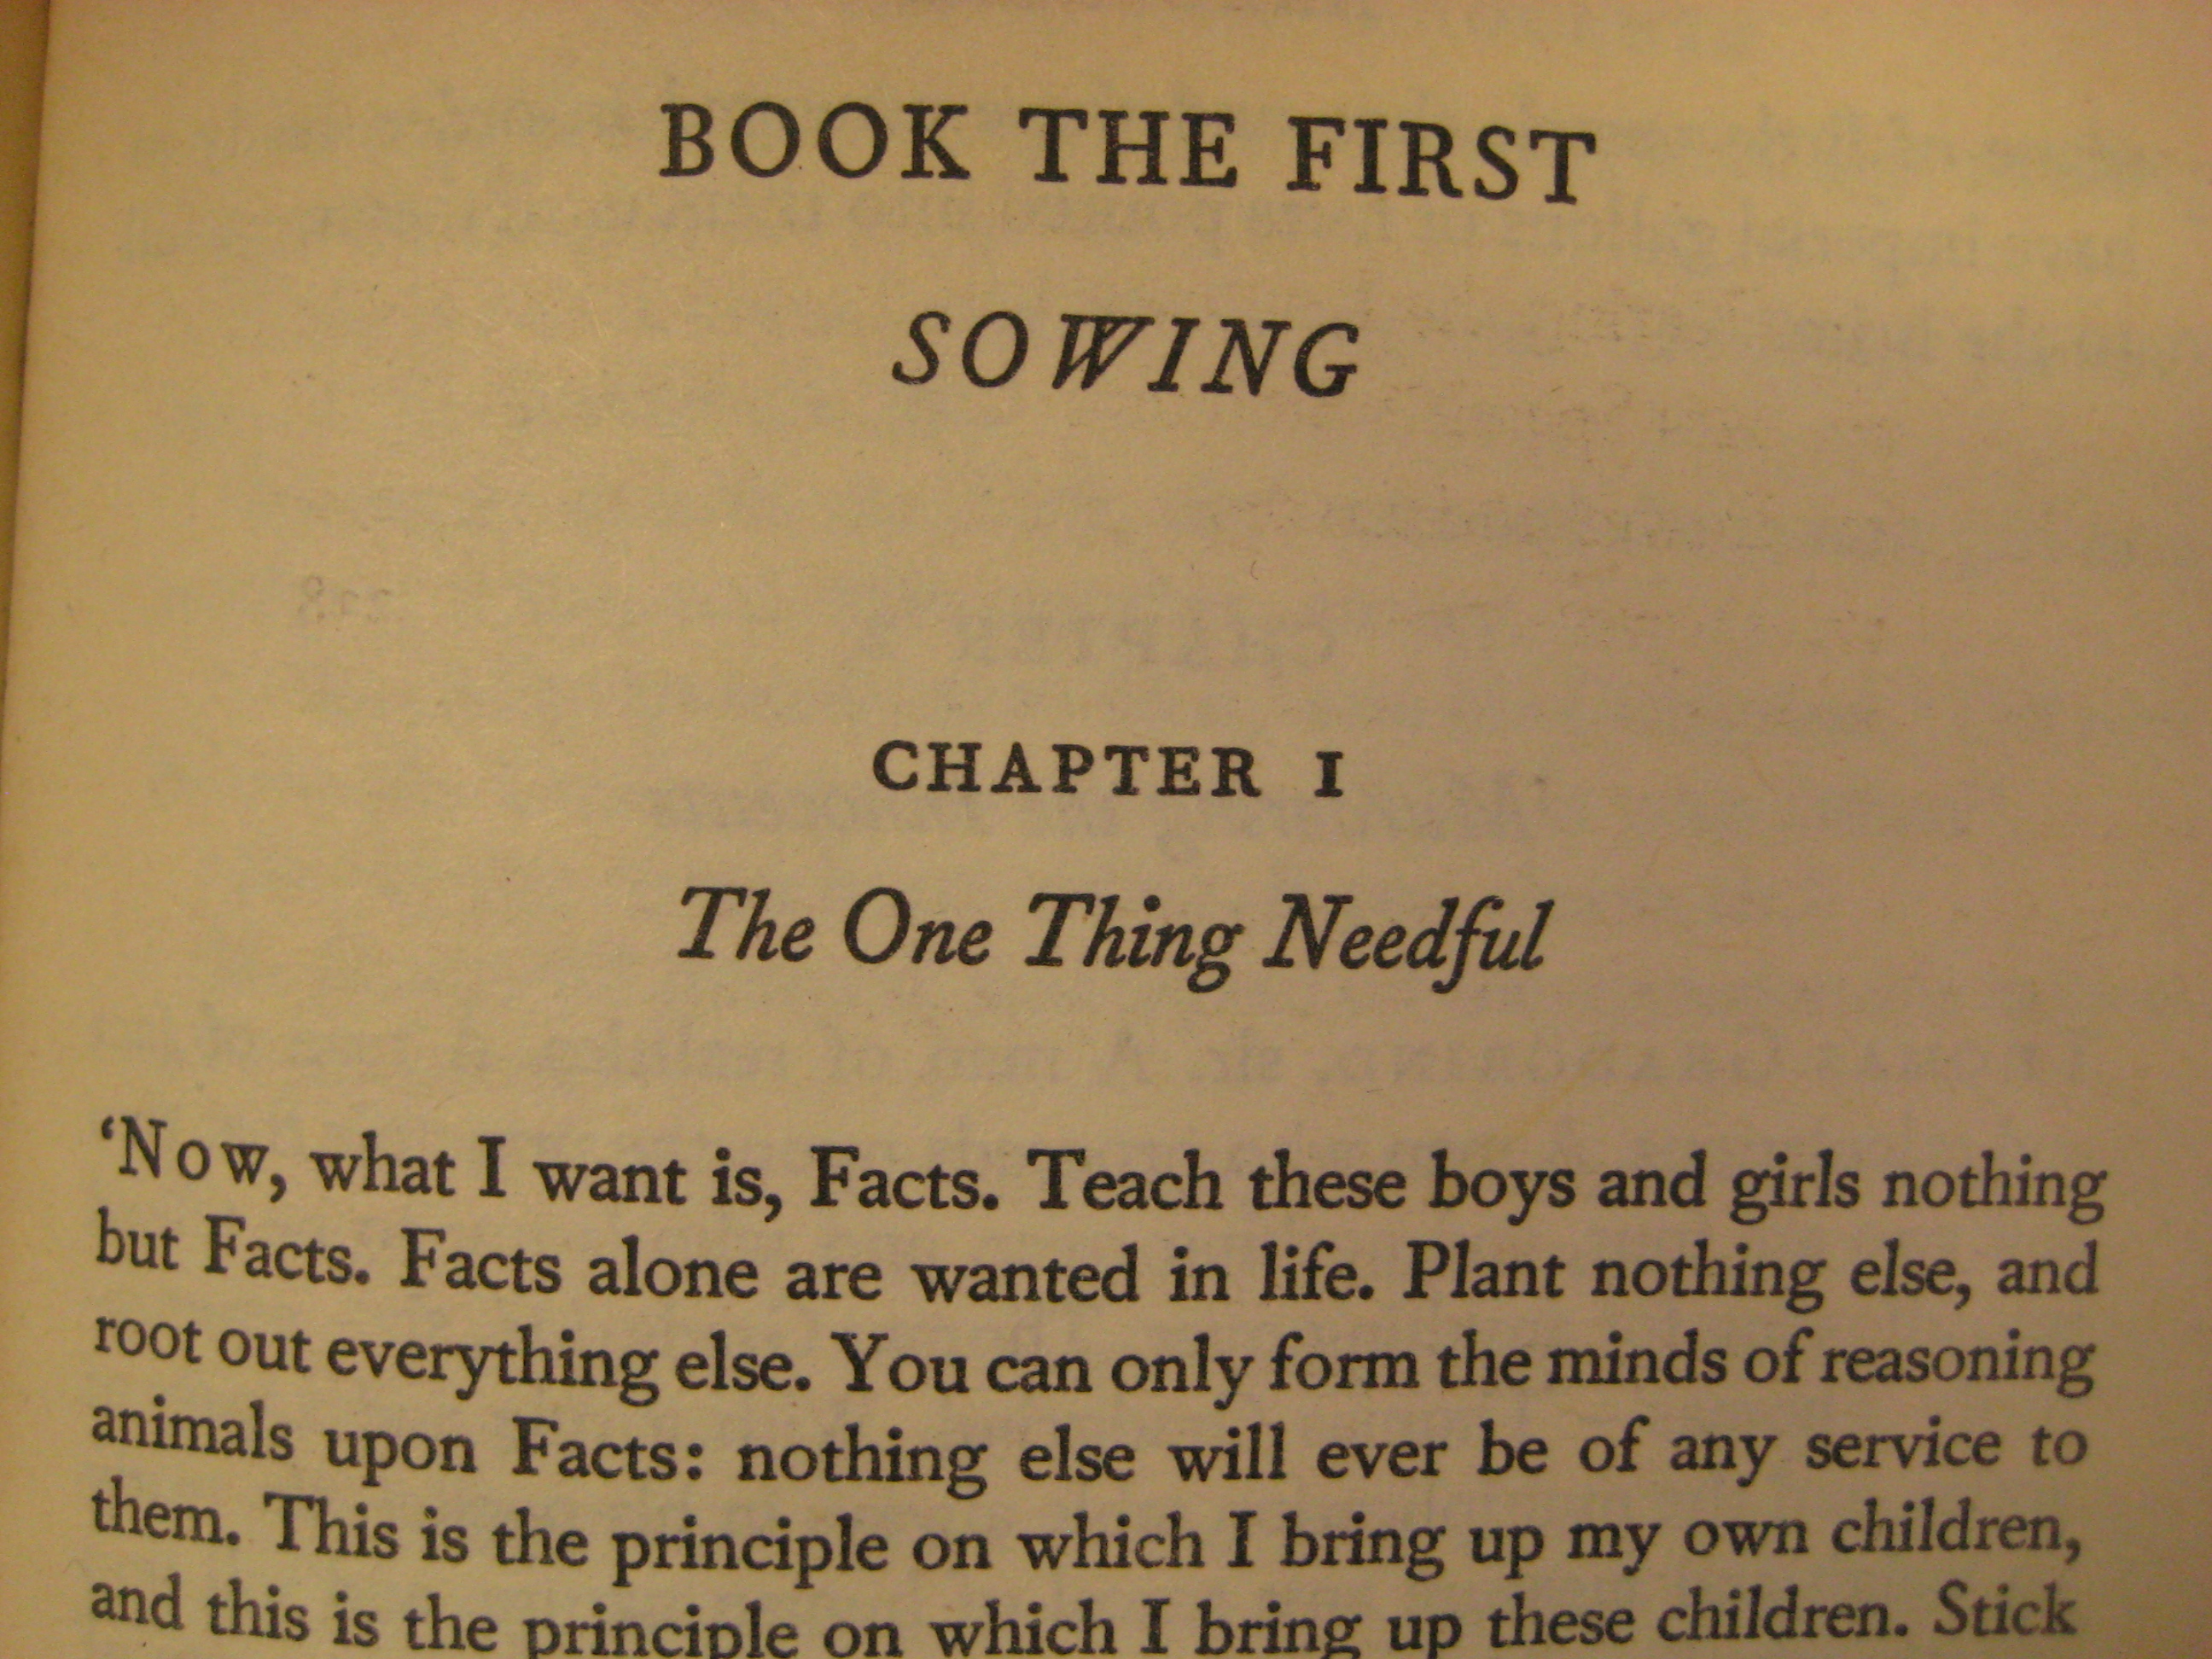 First Lines of Famous Novels, The Blog